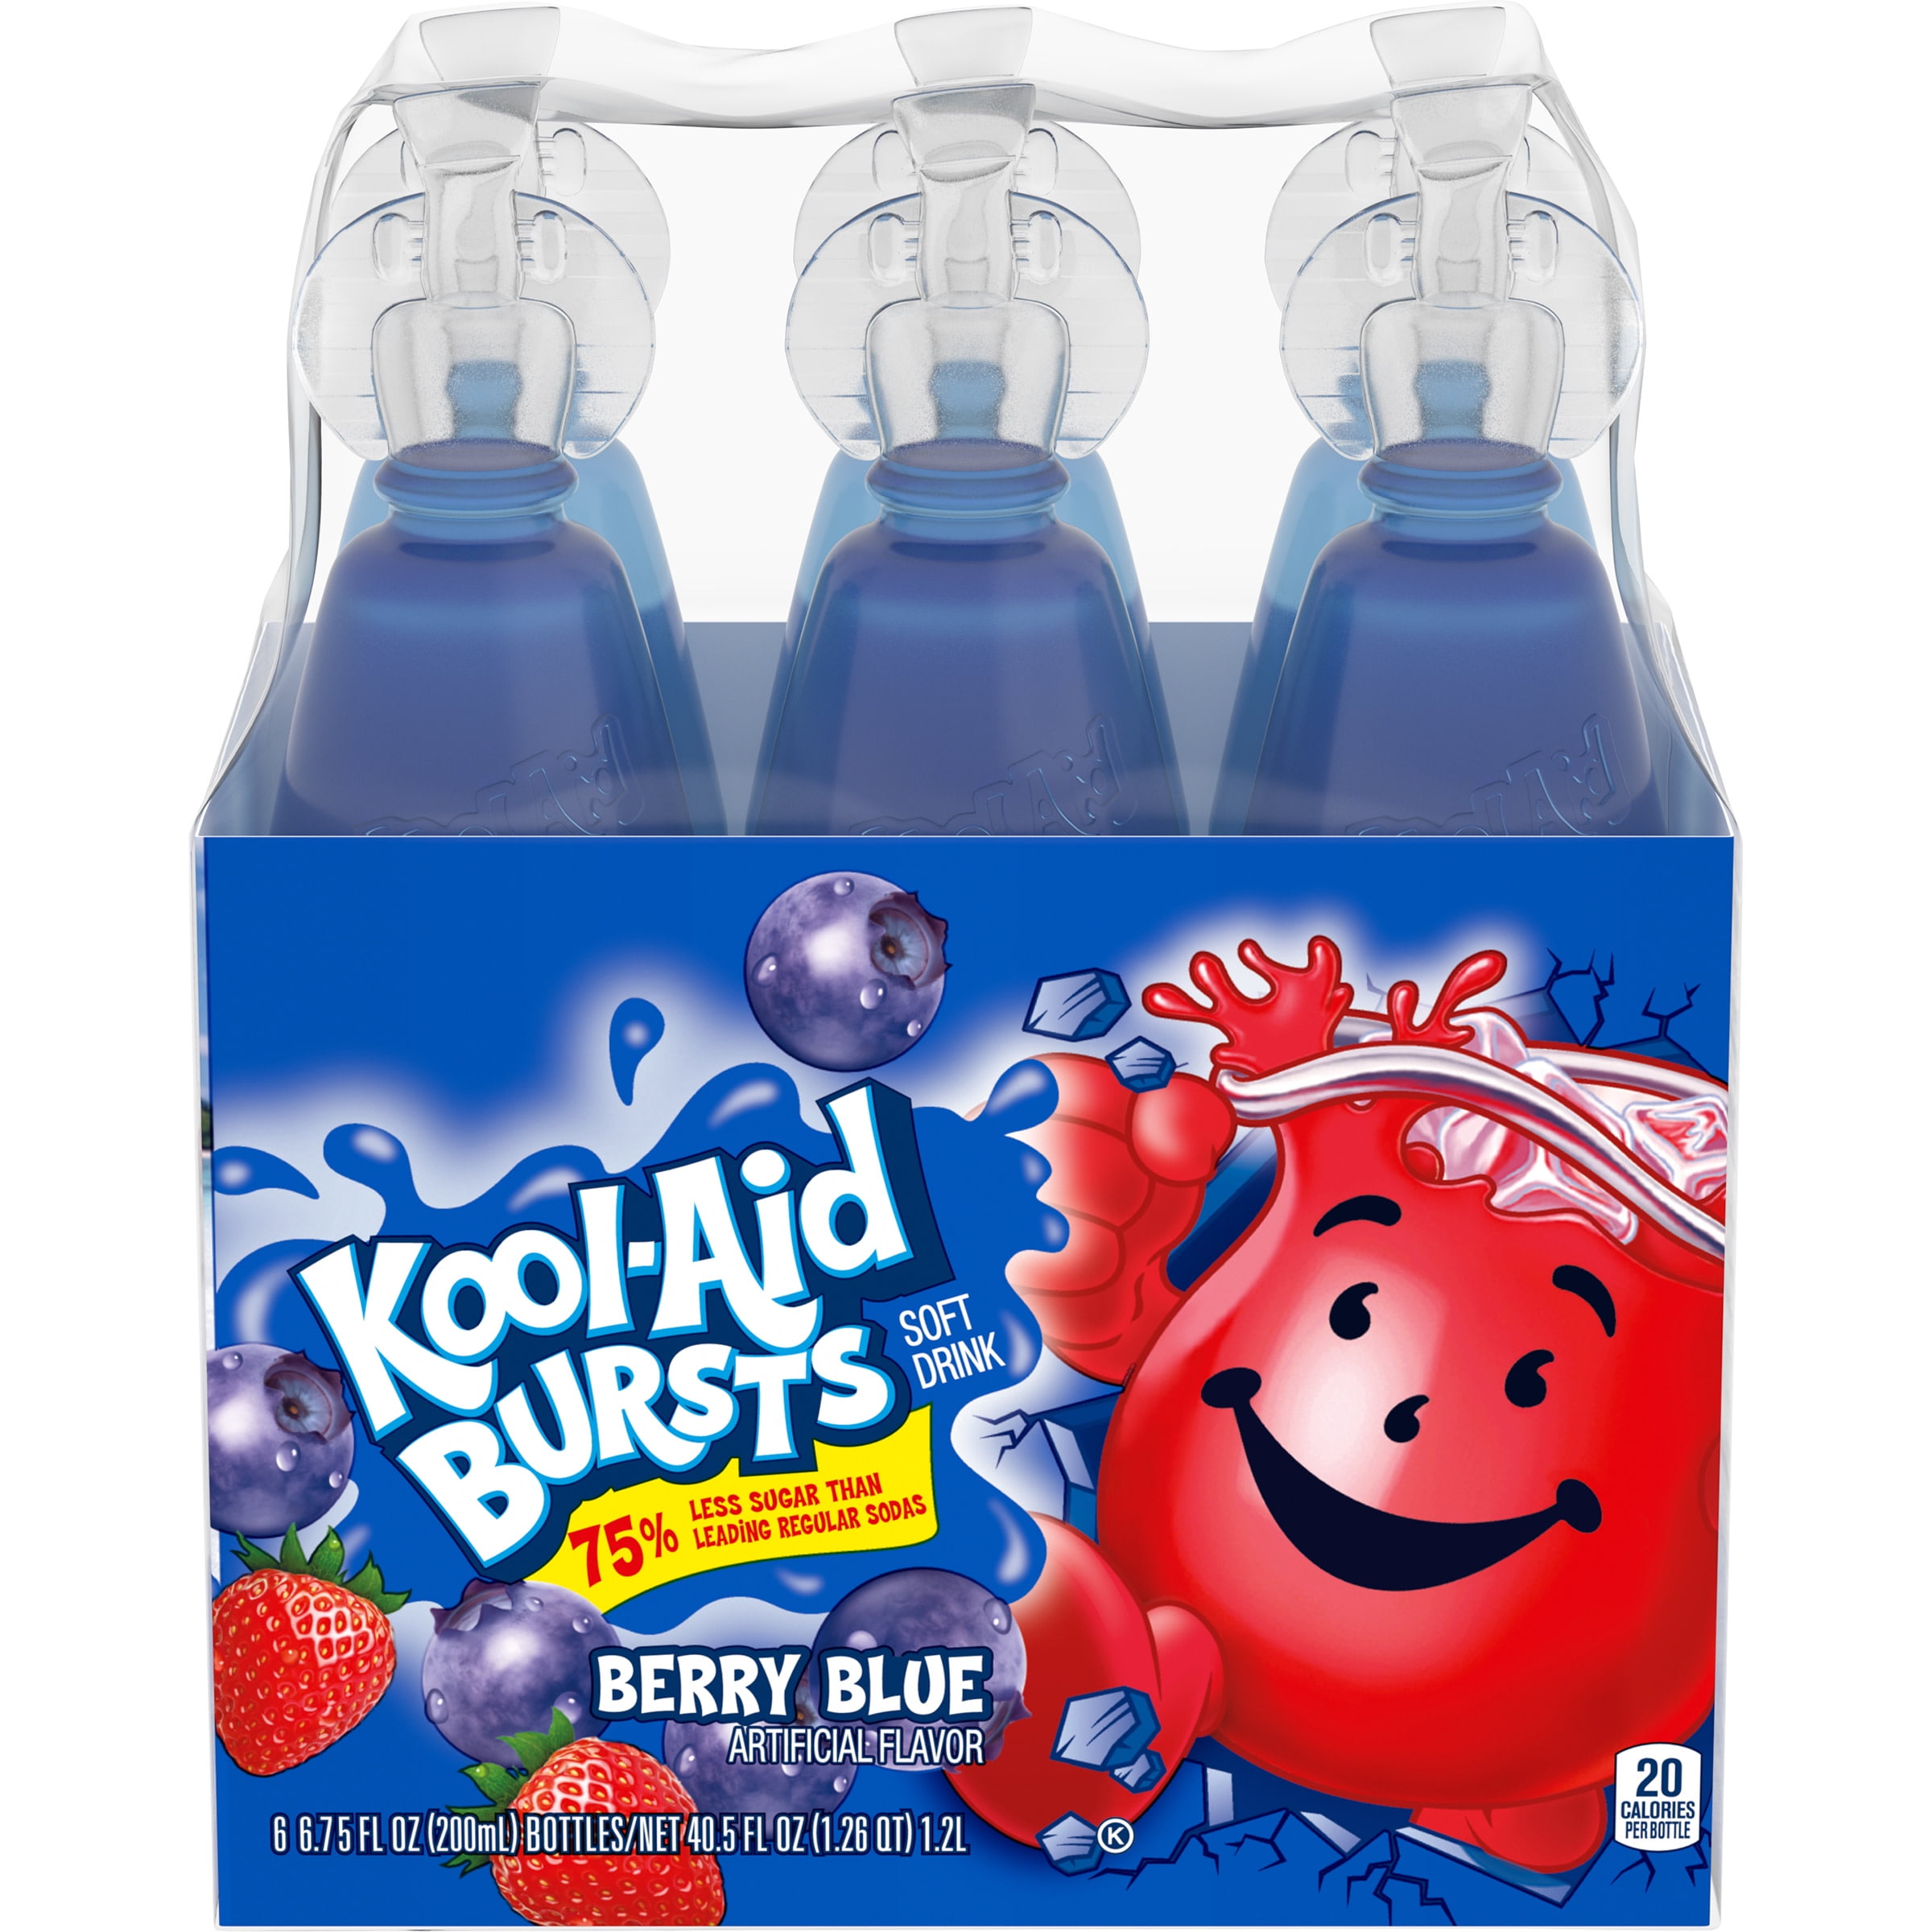 KoolAid Bursts Berry Blue Artificially Flavored Soft